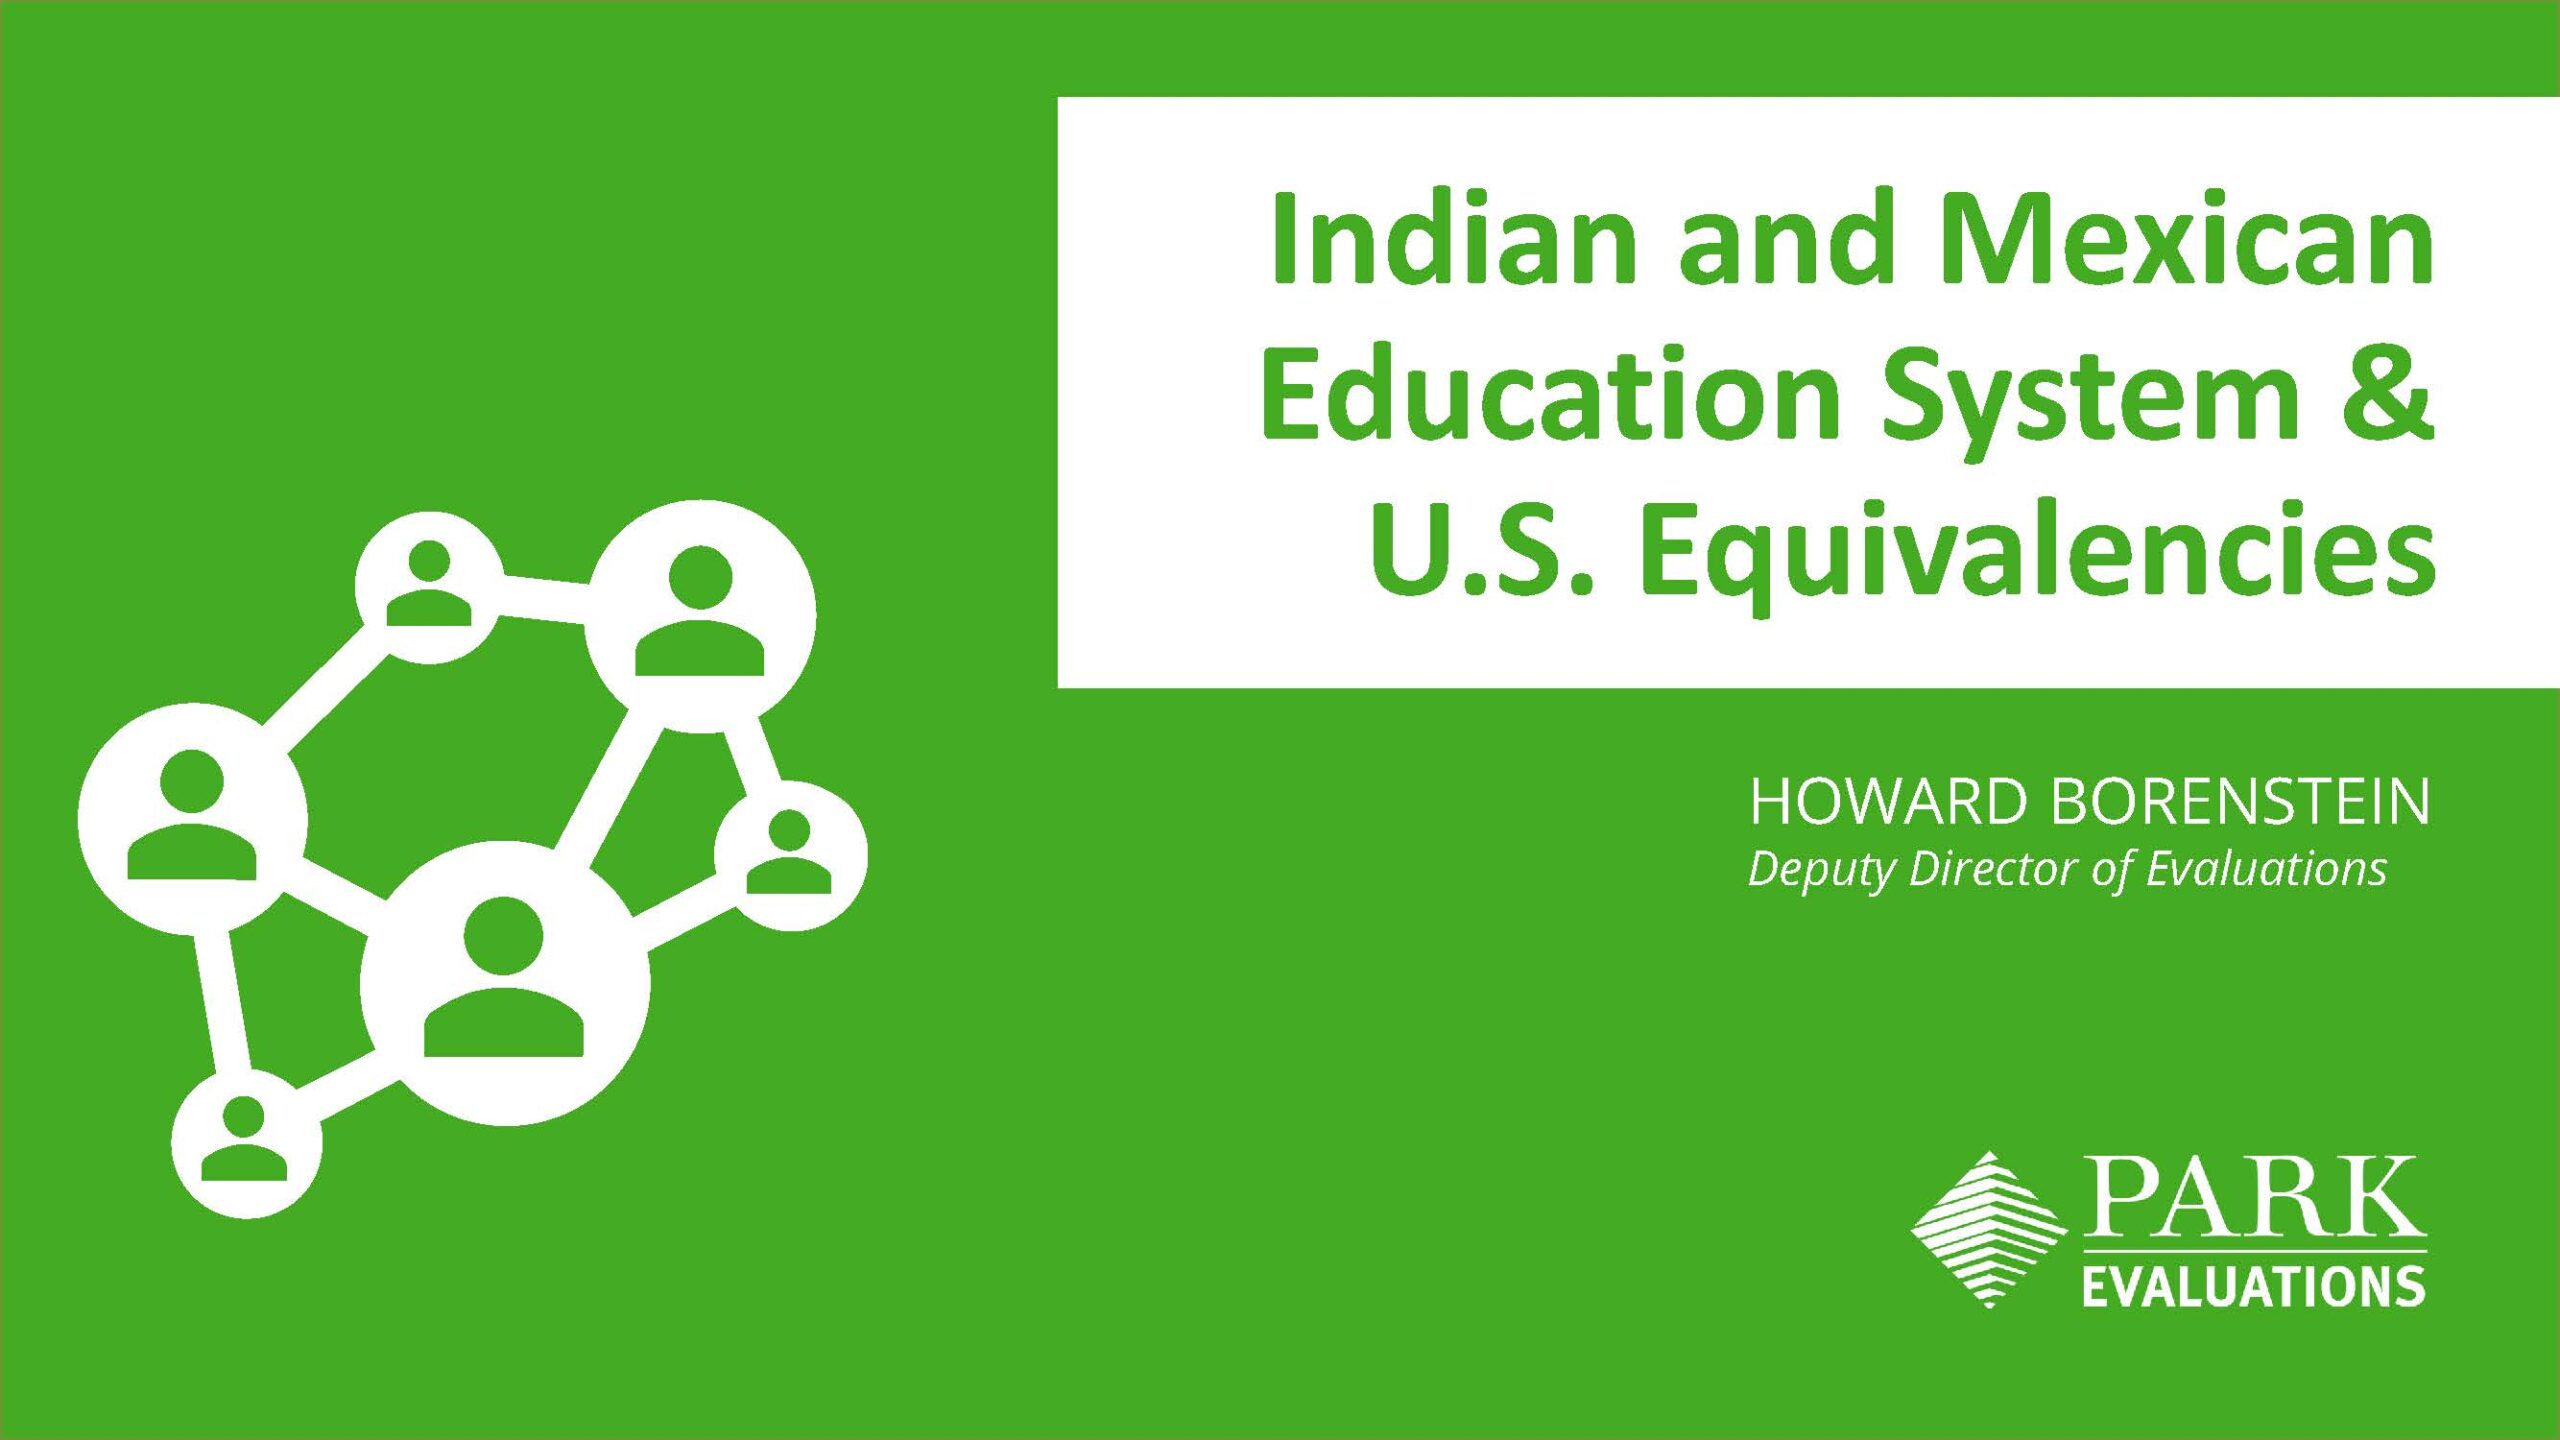 Indian and Mexican Education System & U.S. Equivalencies